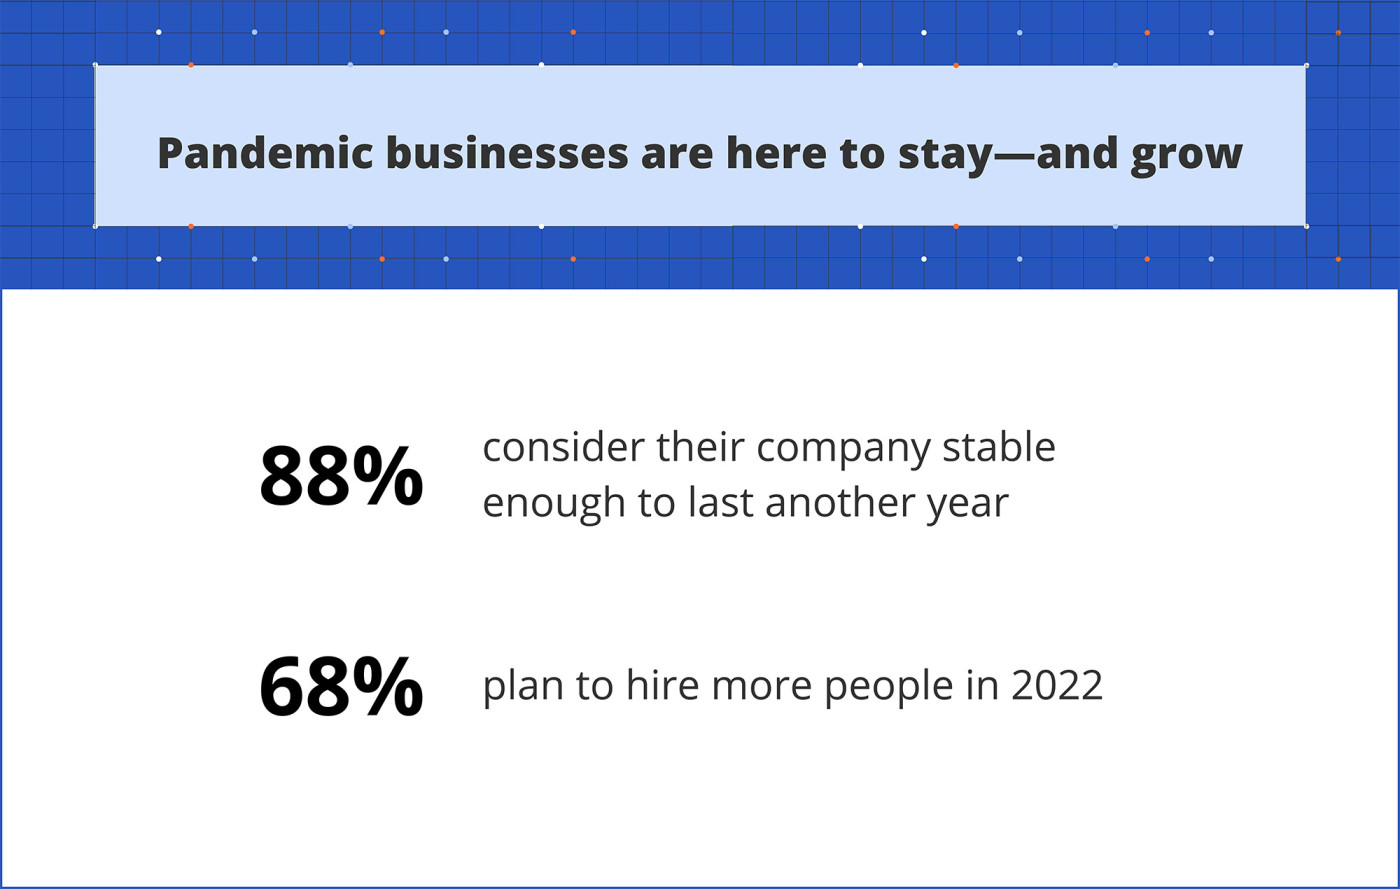 An infographic showing that 88% of pandemic businesses consider their company stable enough to last another year and 68% plan to hire more people in 2022